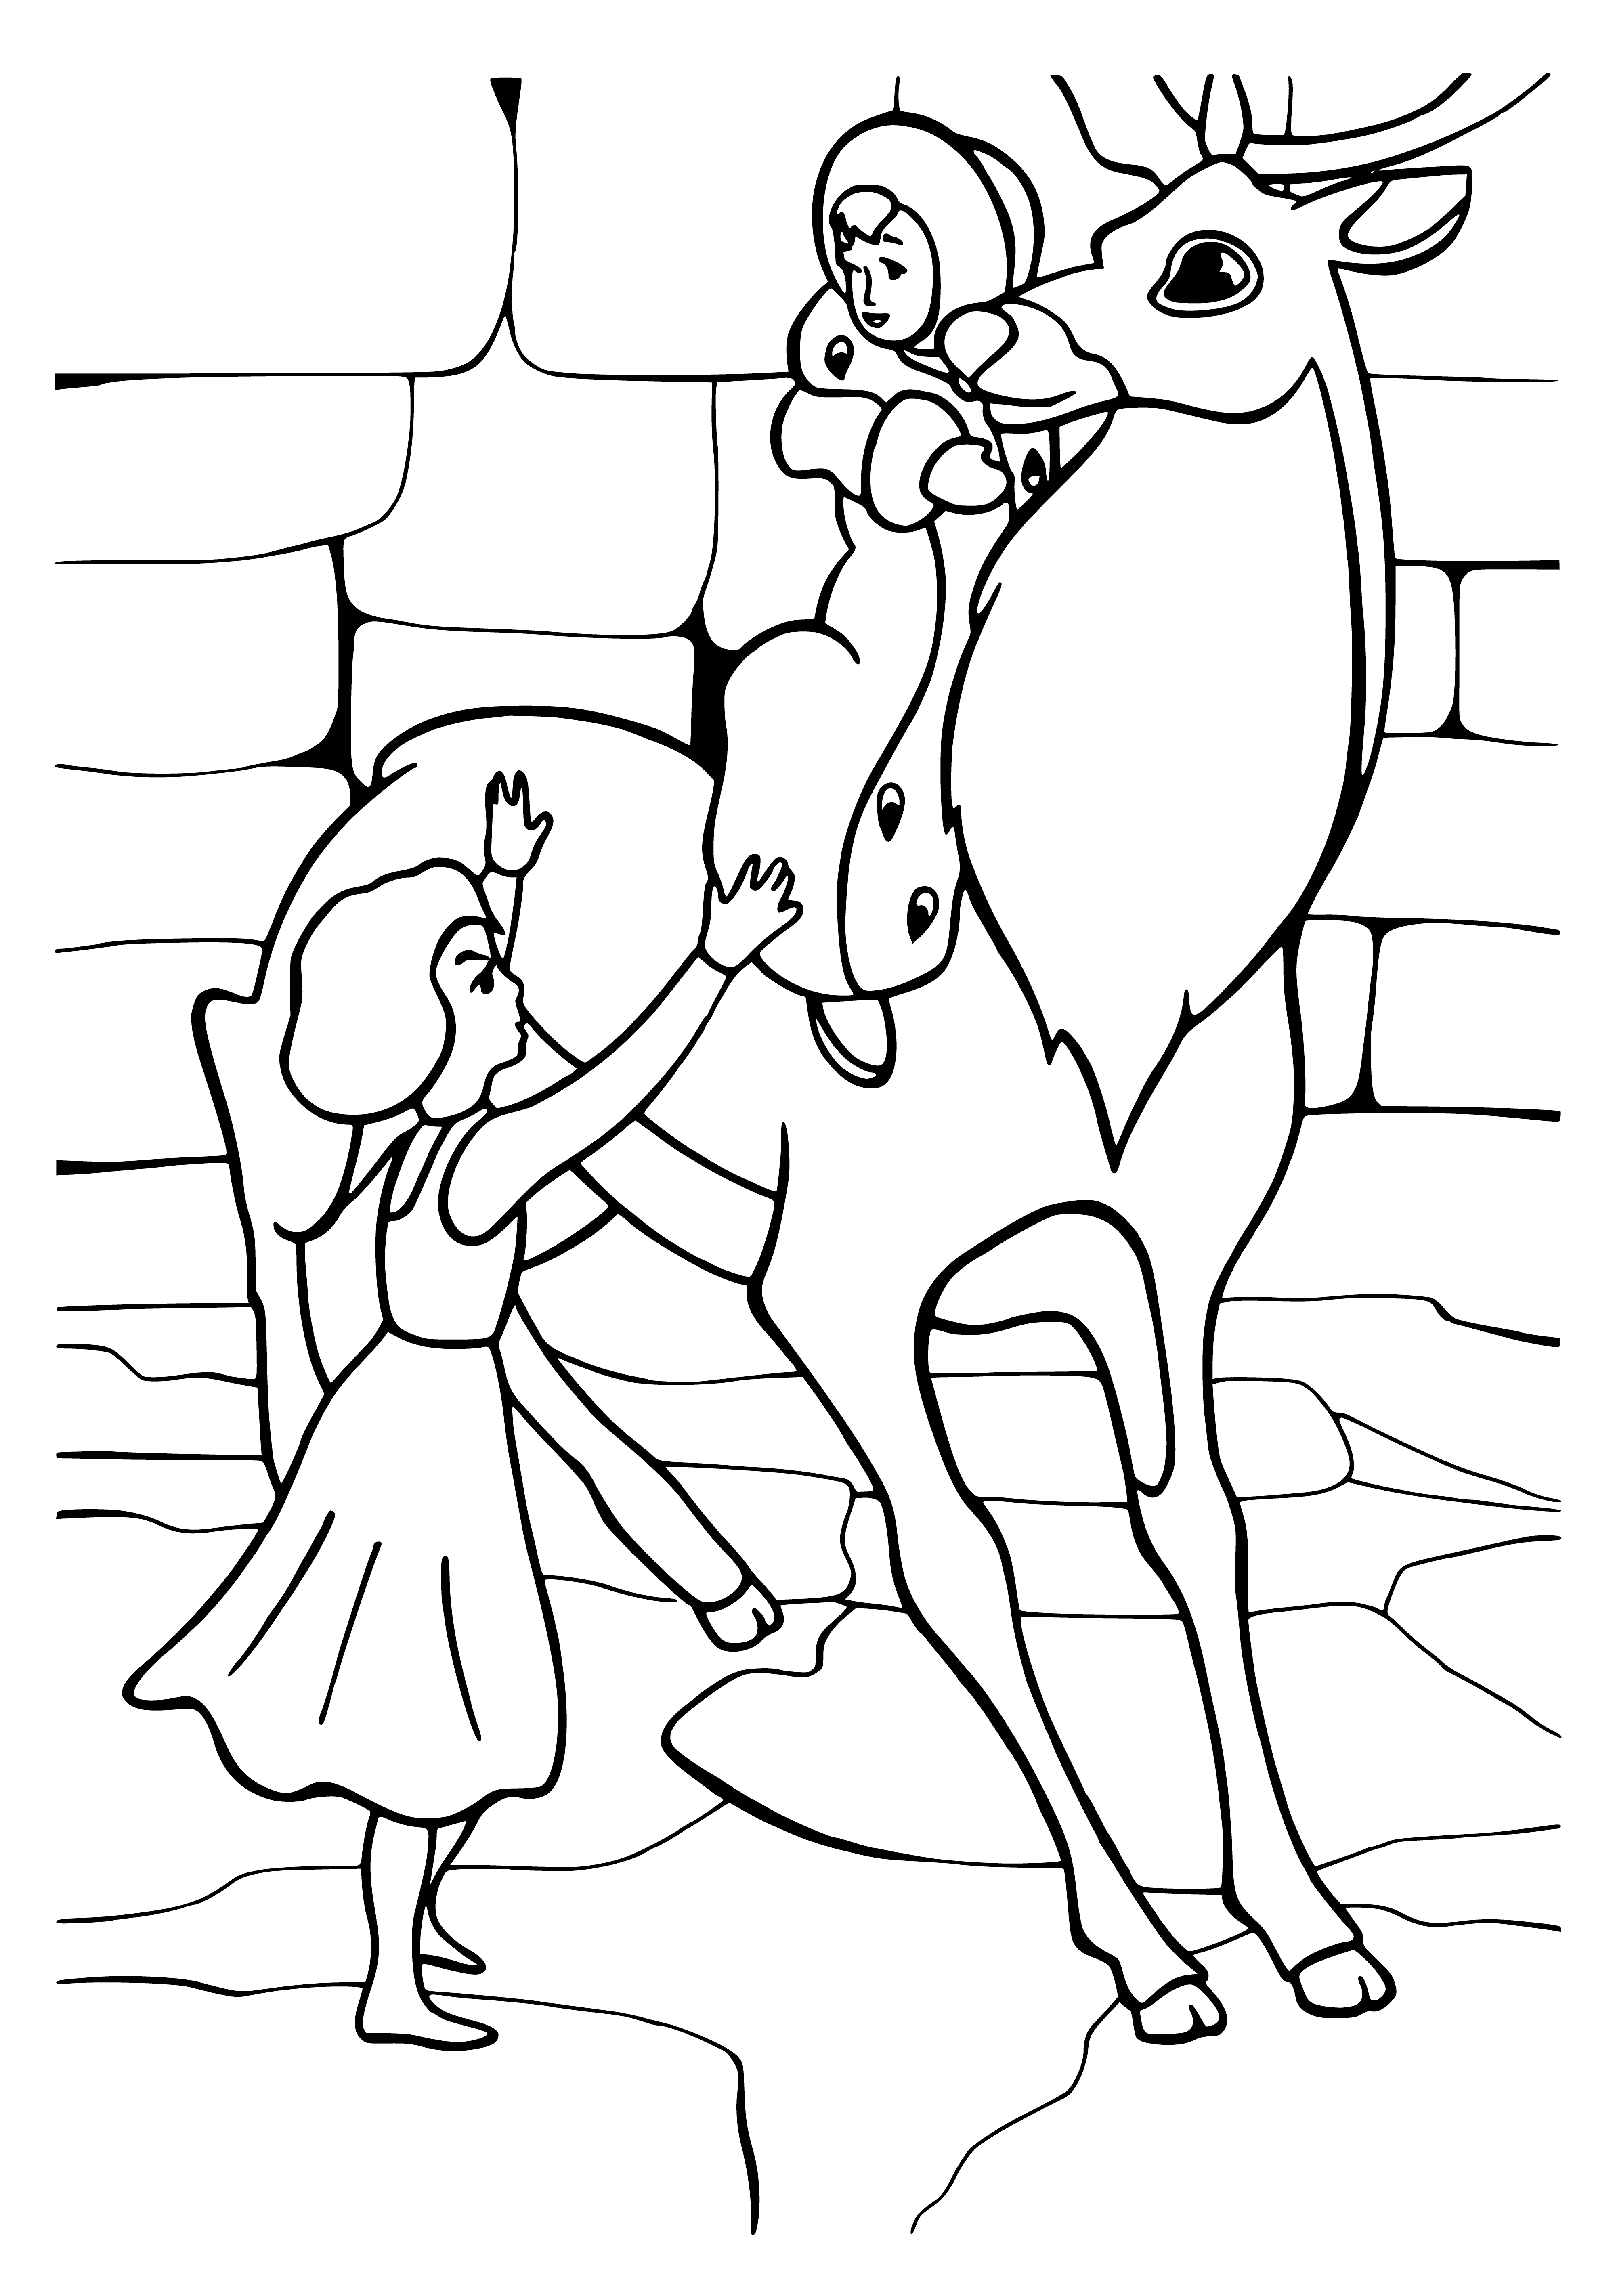 coloring page: Girl w/ red scarf & stick standing in front of snowman looks mischievous. Ready to hit snowman?